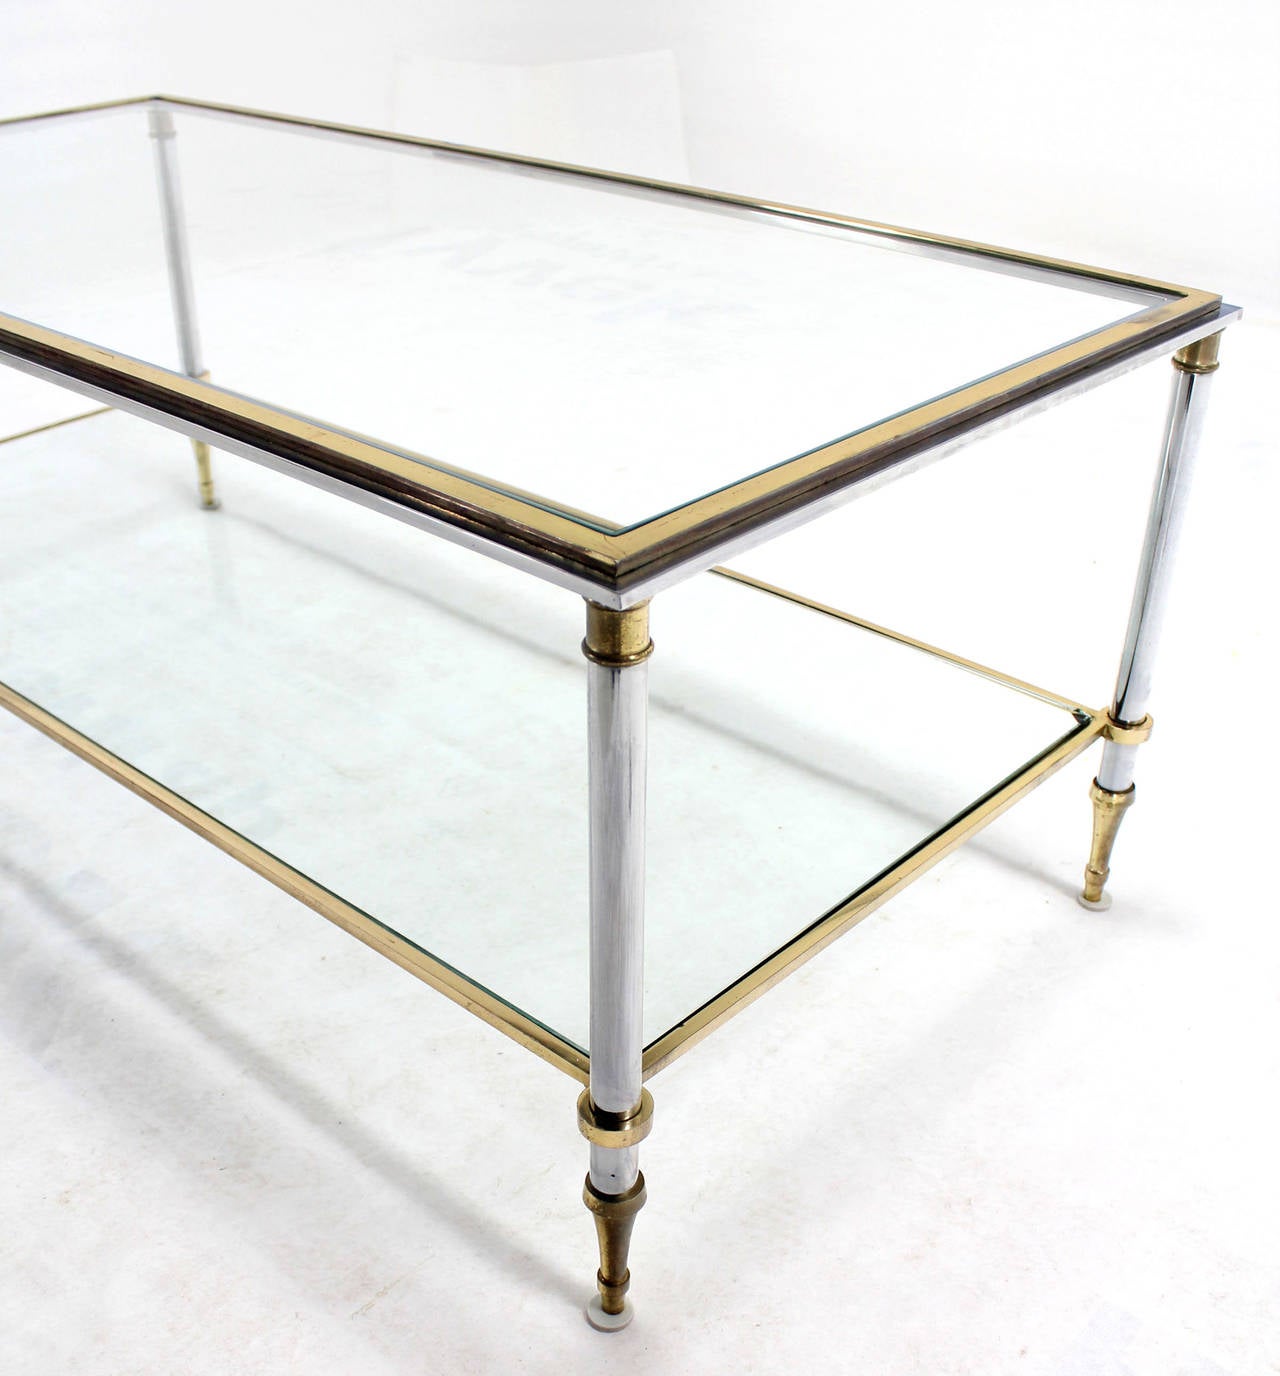 Polished Brass Chrome and Glass-Top Mid-Century Modern Rectangular Coffee Table